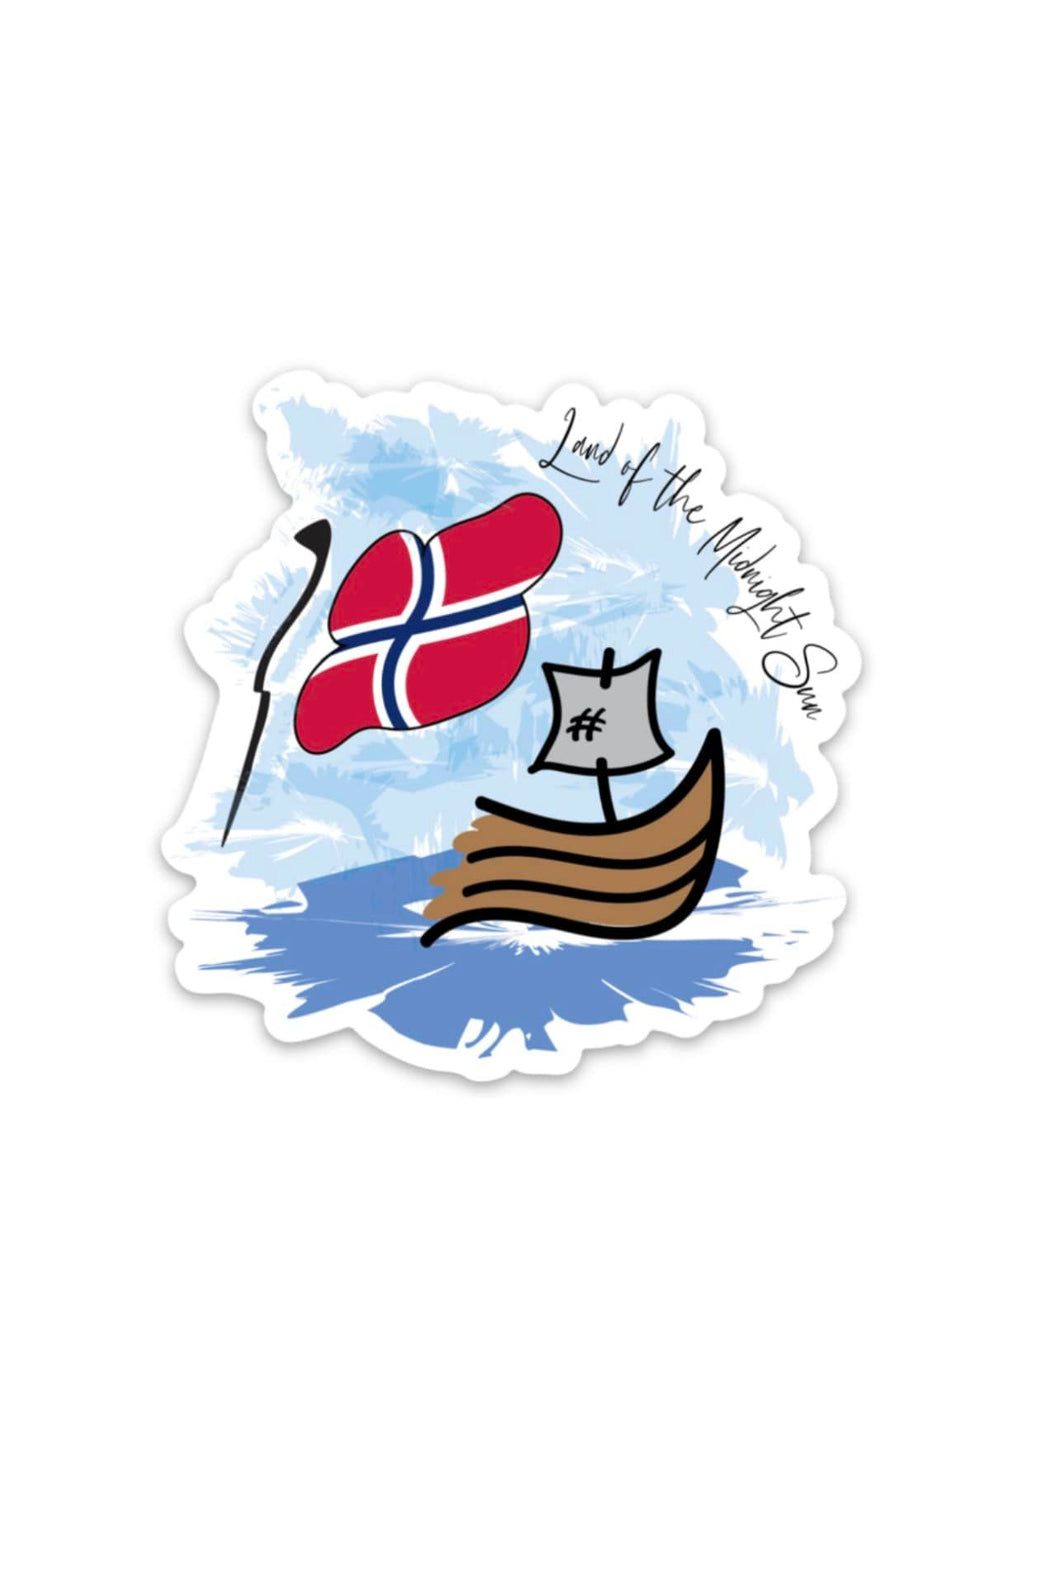 Viking Ship and Norway Flag 3x3 Sticker